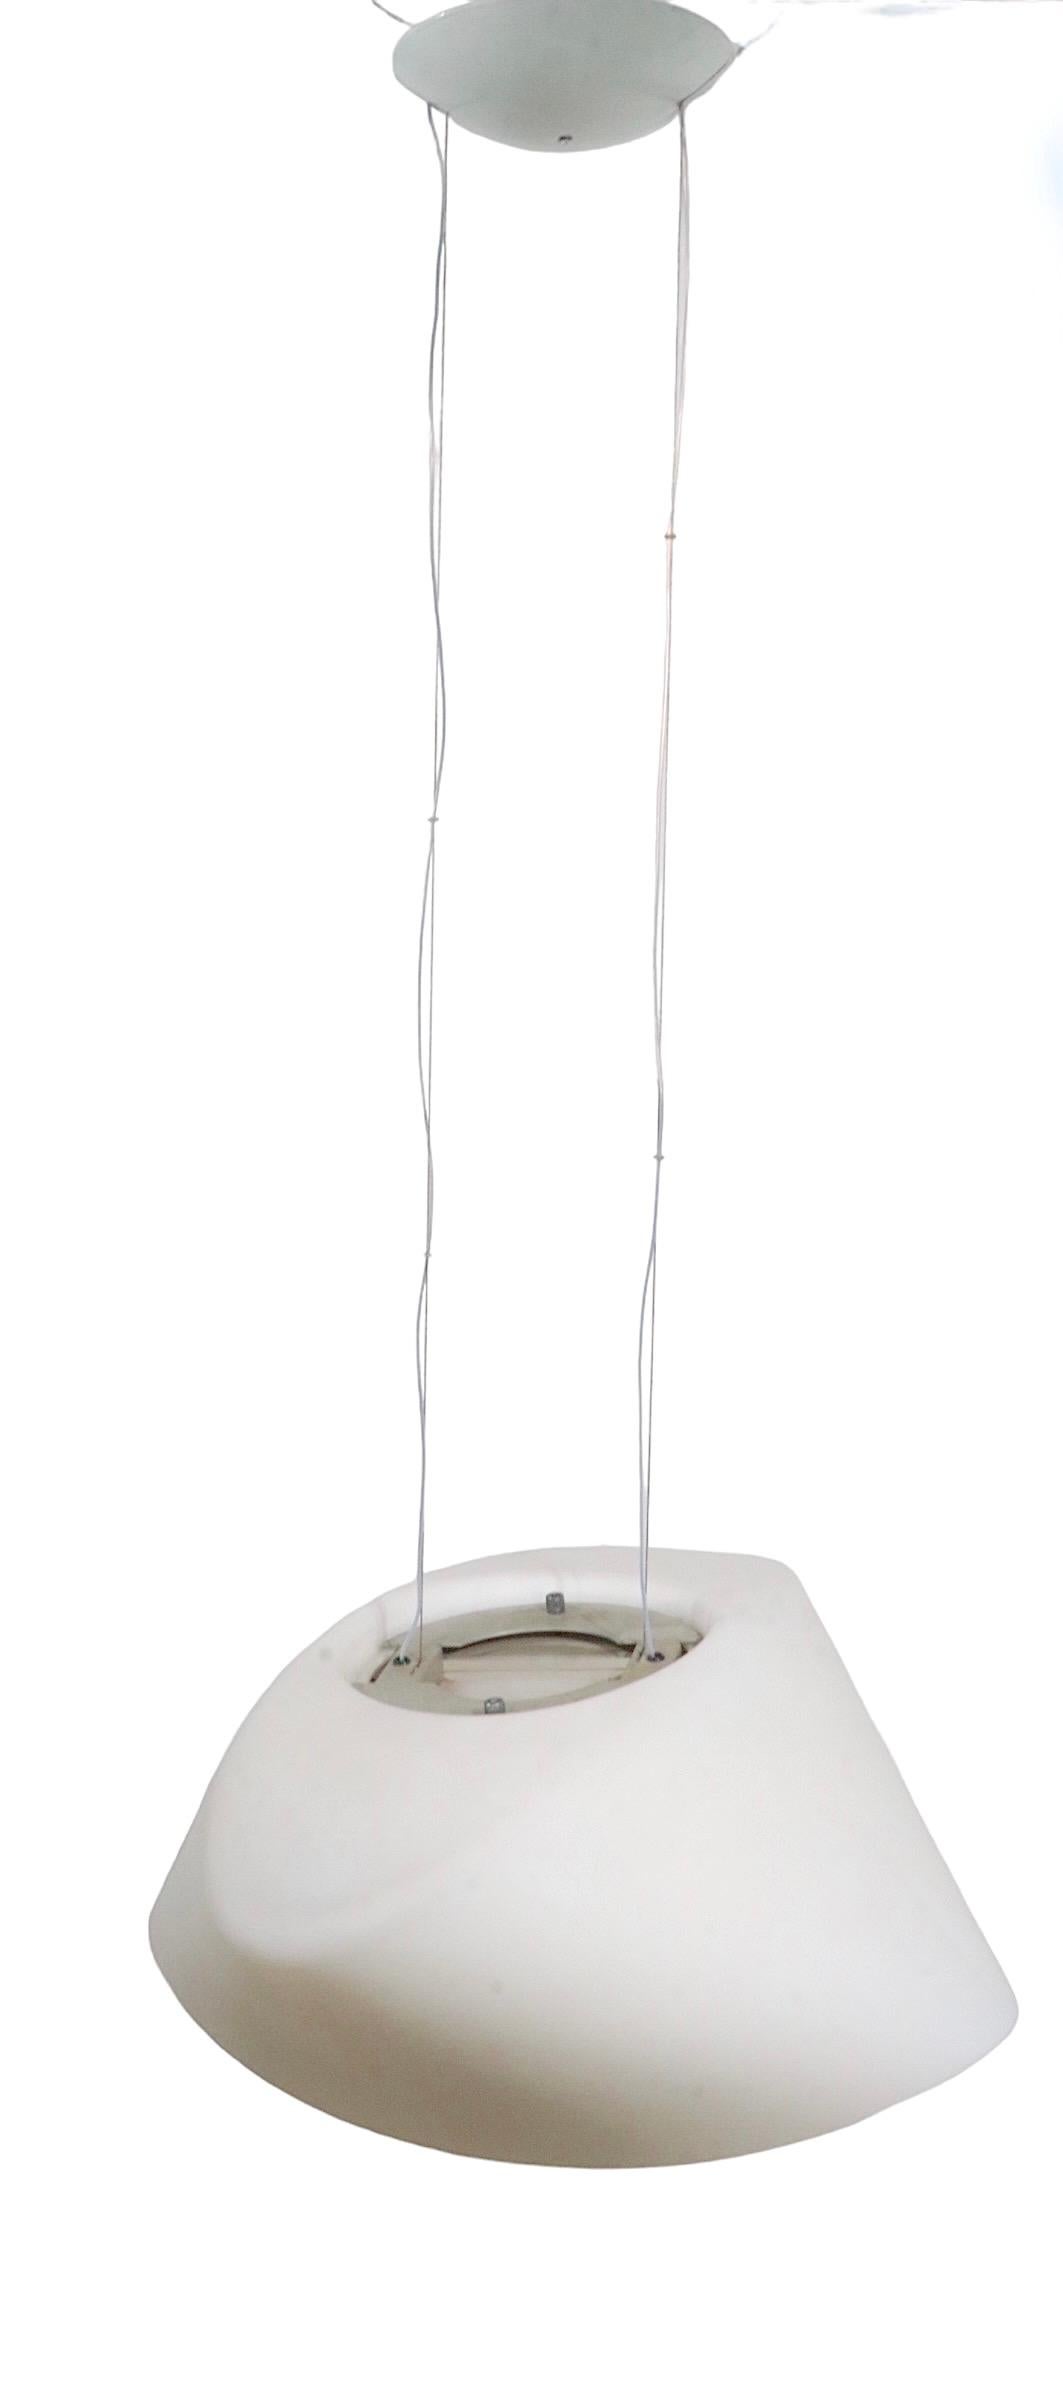 Asymmetrical Satin Glass Post Modern Light Fixture Made in Italy by Foscarini For Sale 10